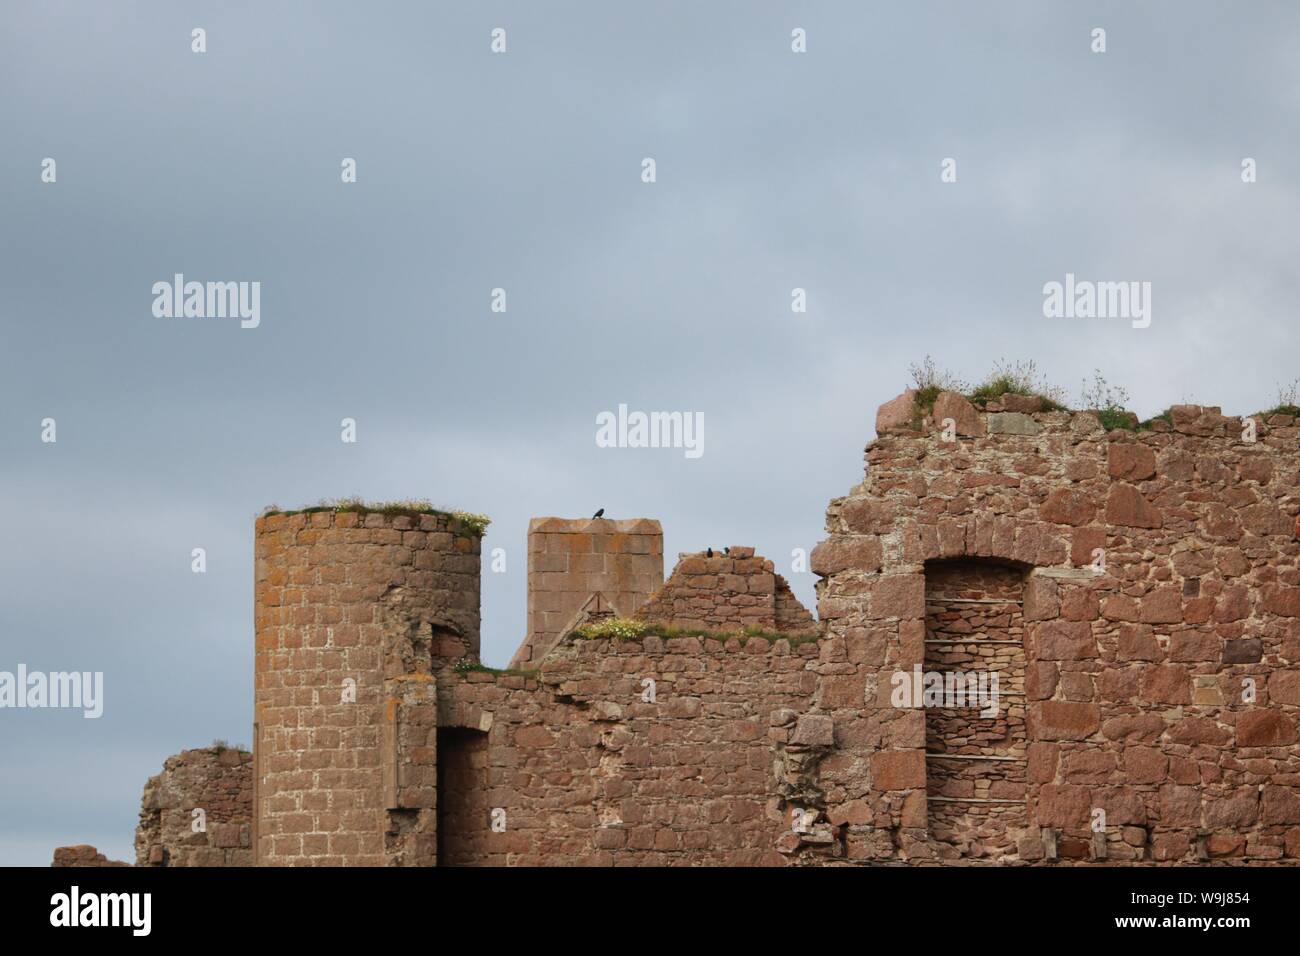 Ruins of old castle Stock Photo